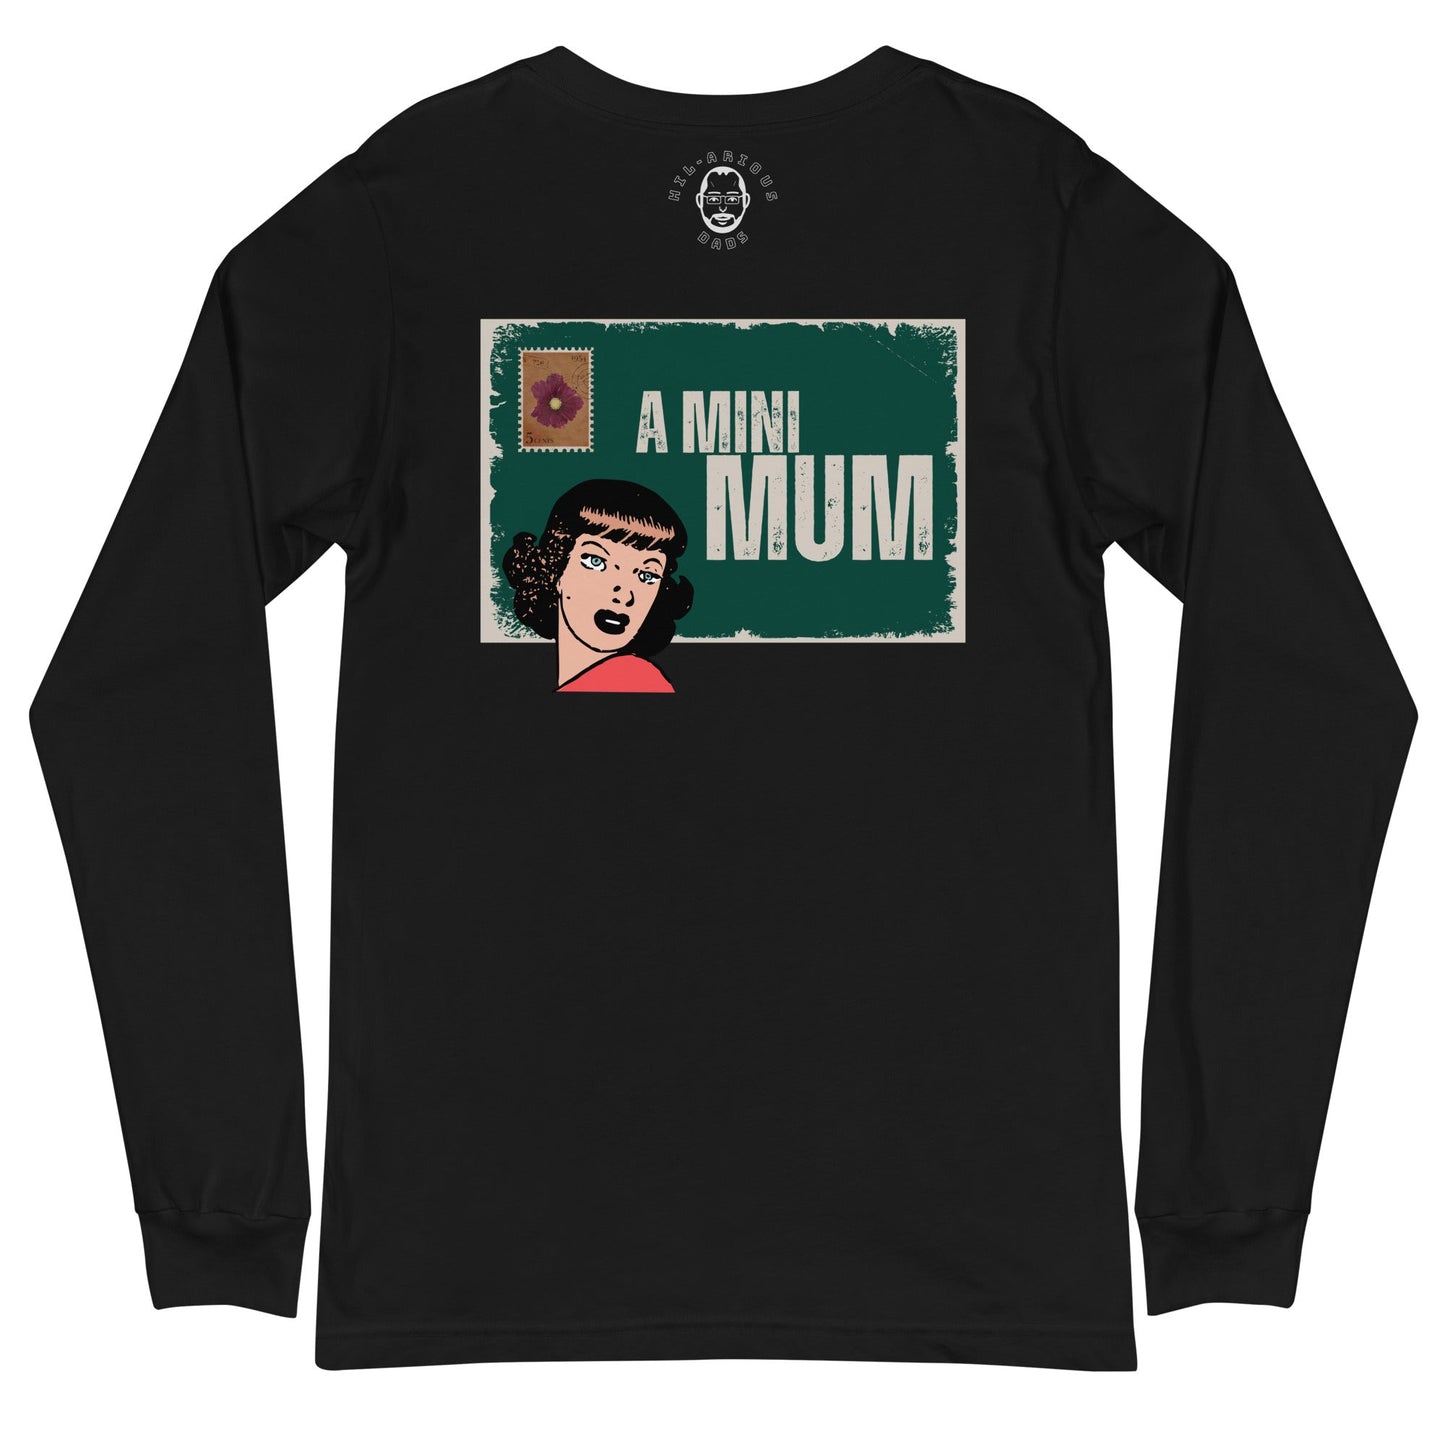 What do you call a small mother?-Long Sleeve Tee - Hil-arious Dads